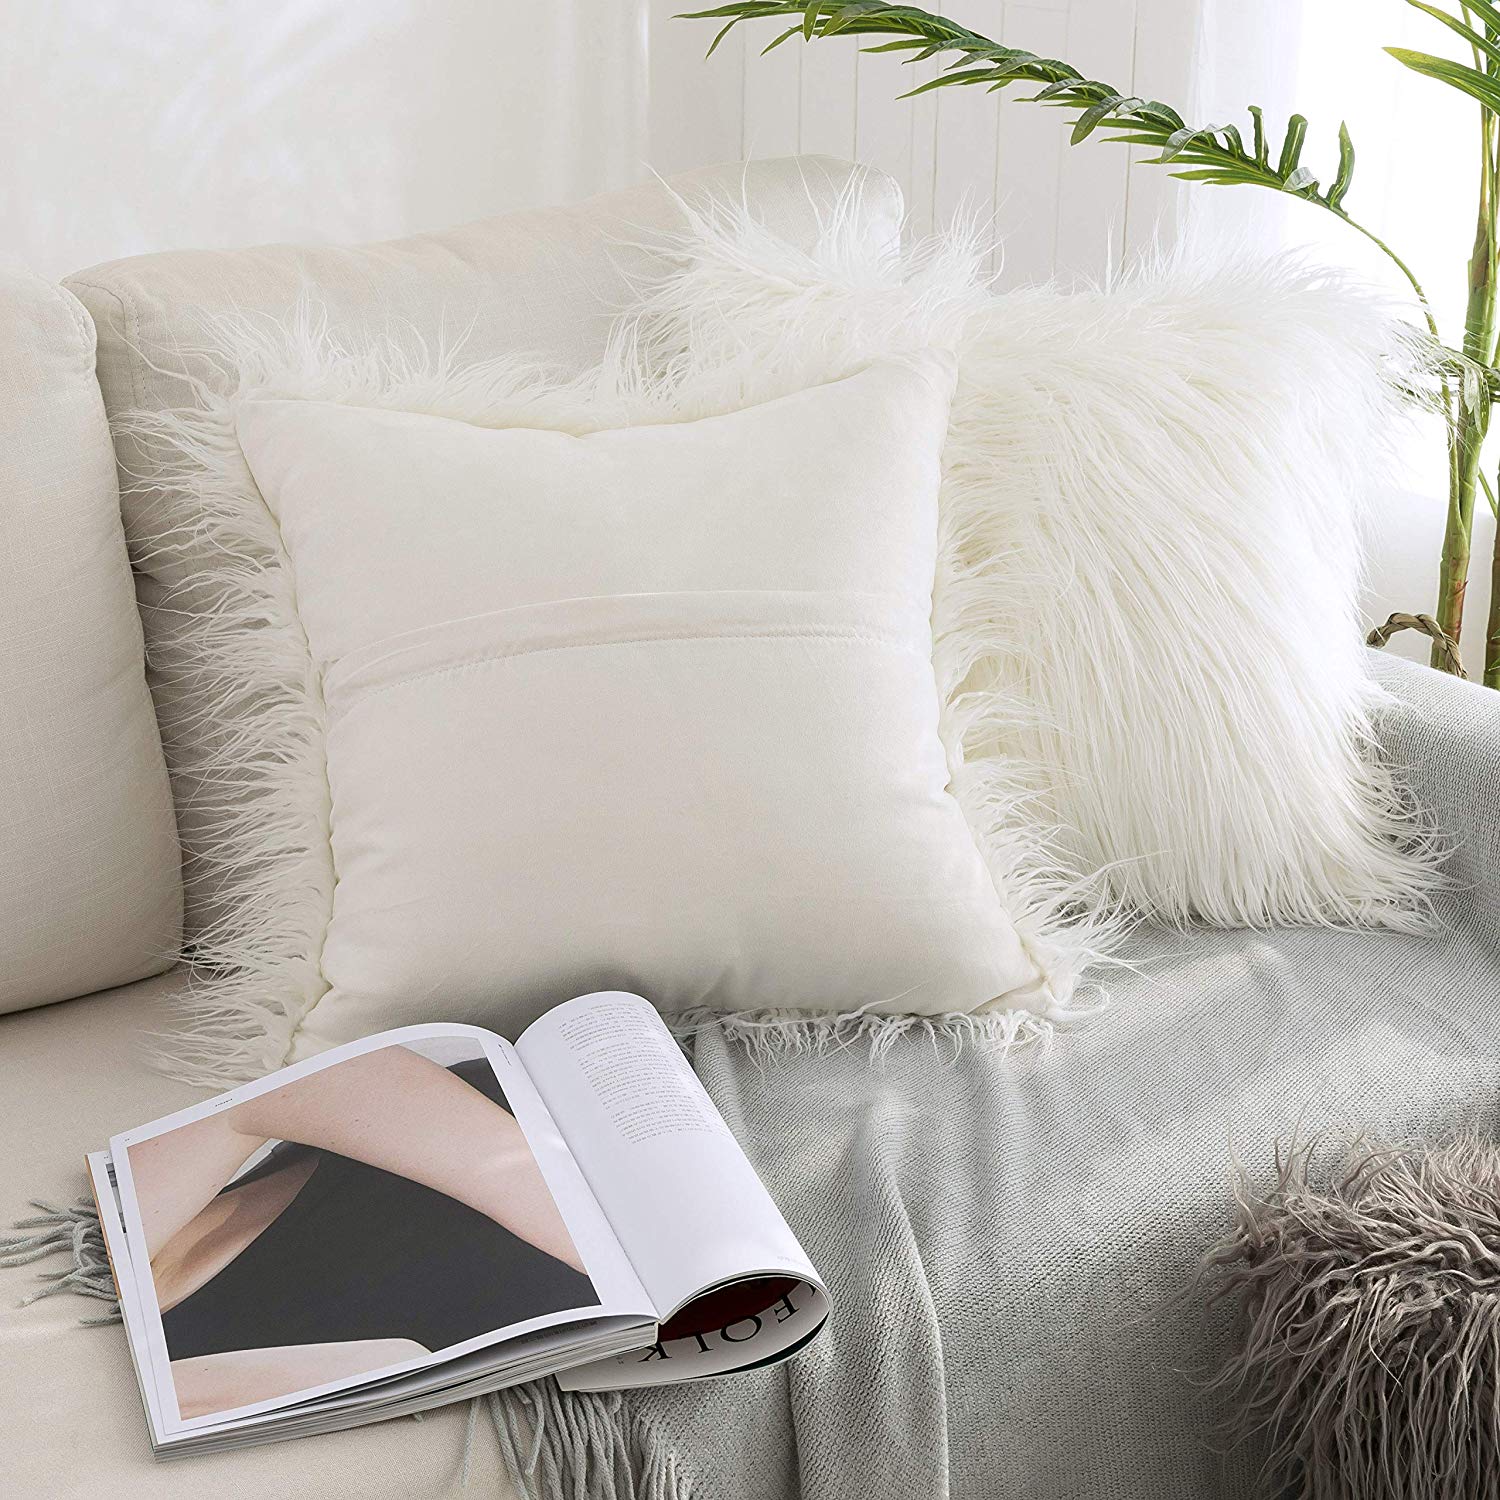 Kevin Textile Set of 2 Decorative New Luxury Series Merino Style Off-White Fur Throw Pillow Case Cushion Cover Pillow Covers for Bed (18" x 18" 45cm x 45cm)